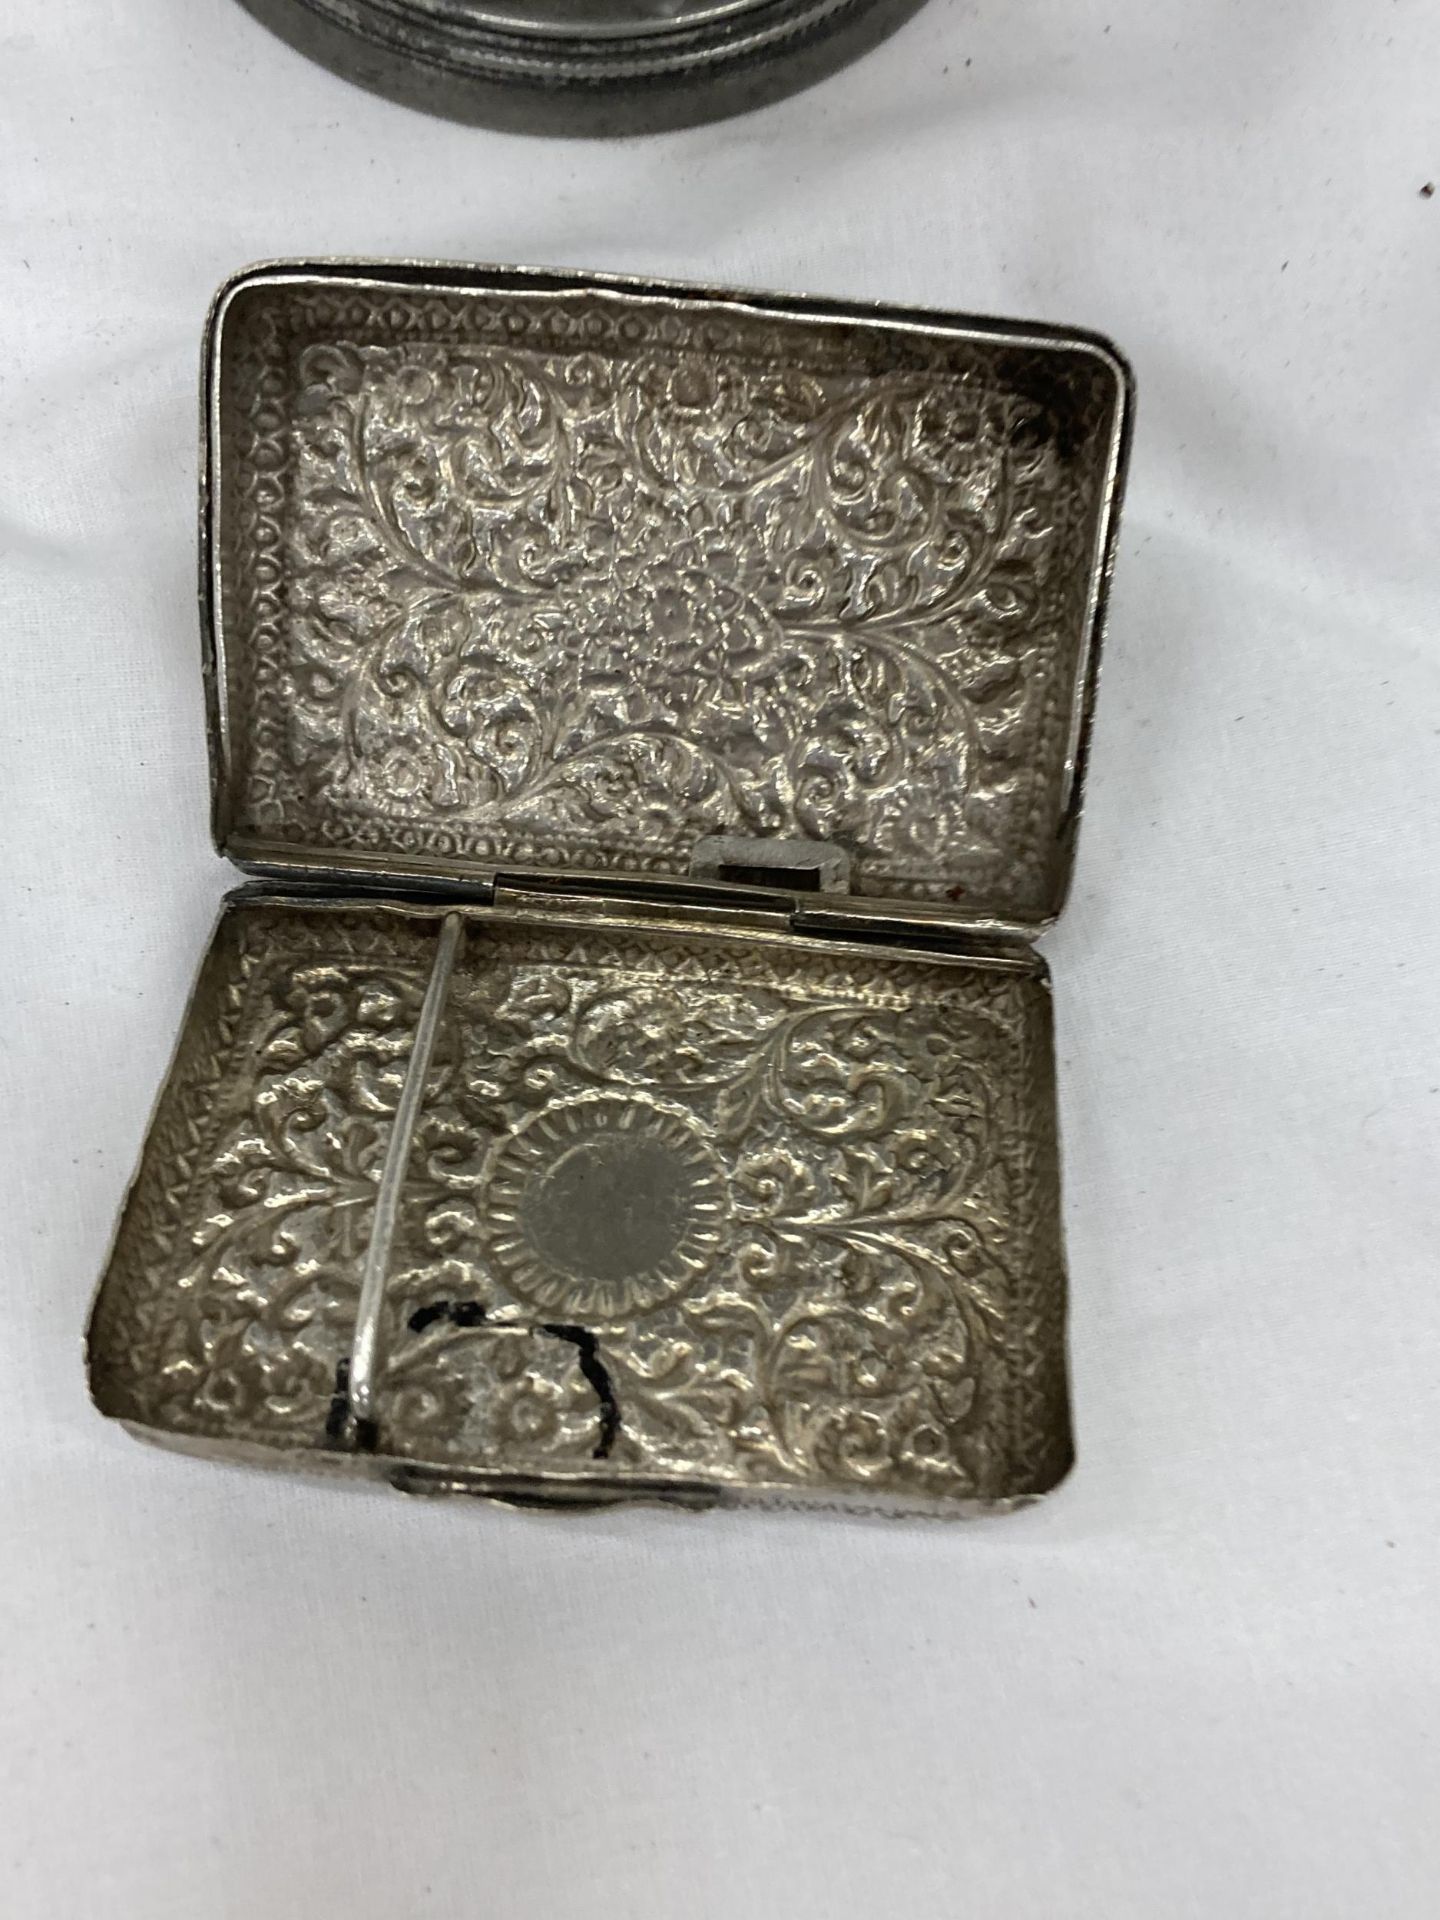 TWO ITEMS - A PEWTER PEDESTAL VASE AND A SILVER PLATED CIGARETTE CASE - Image 3 of 4